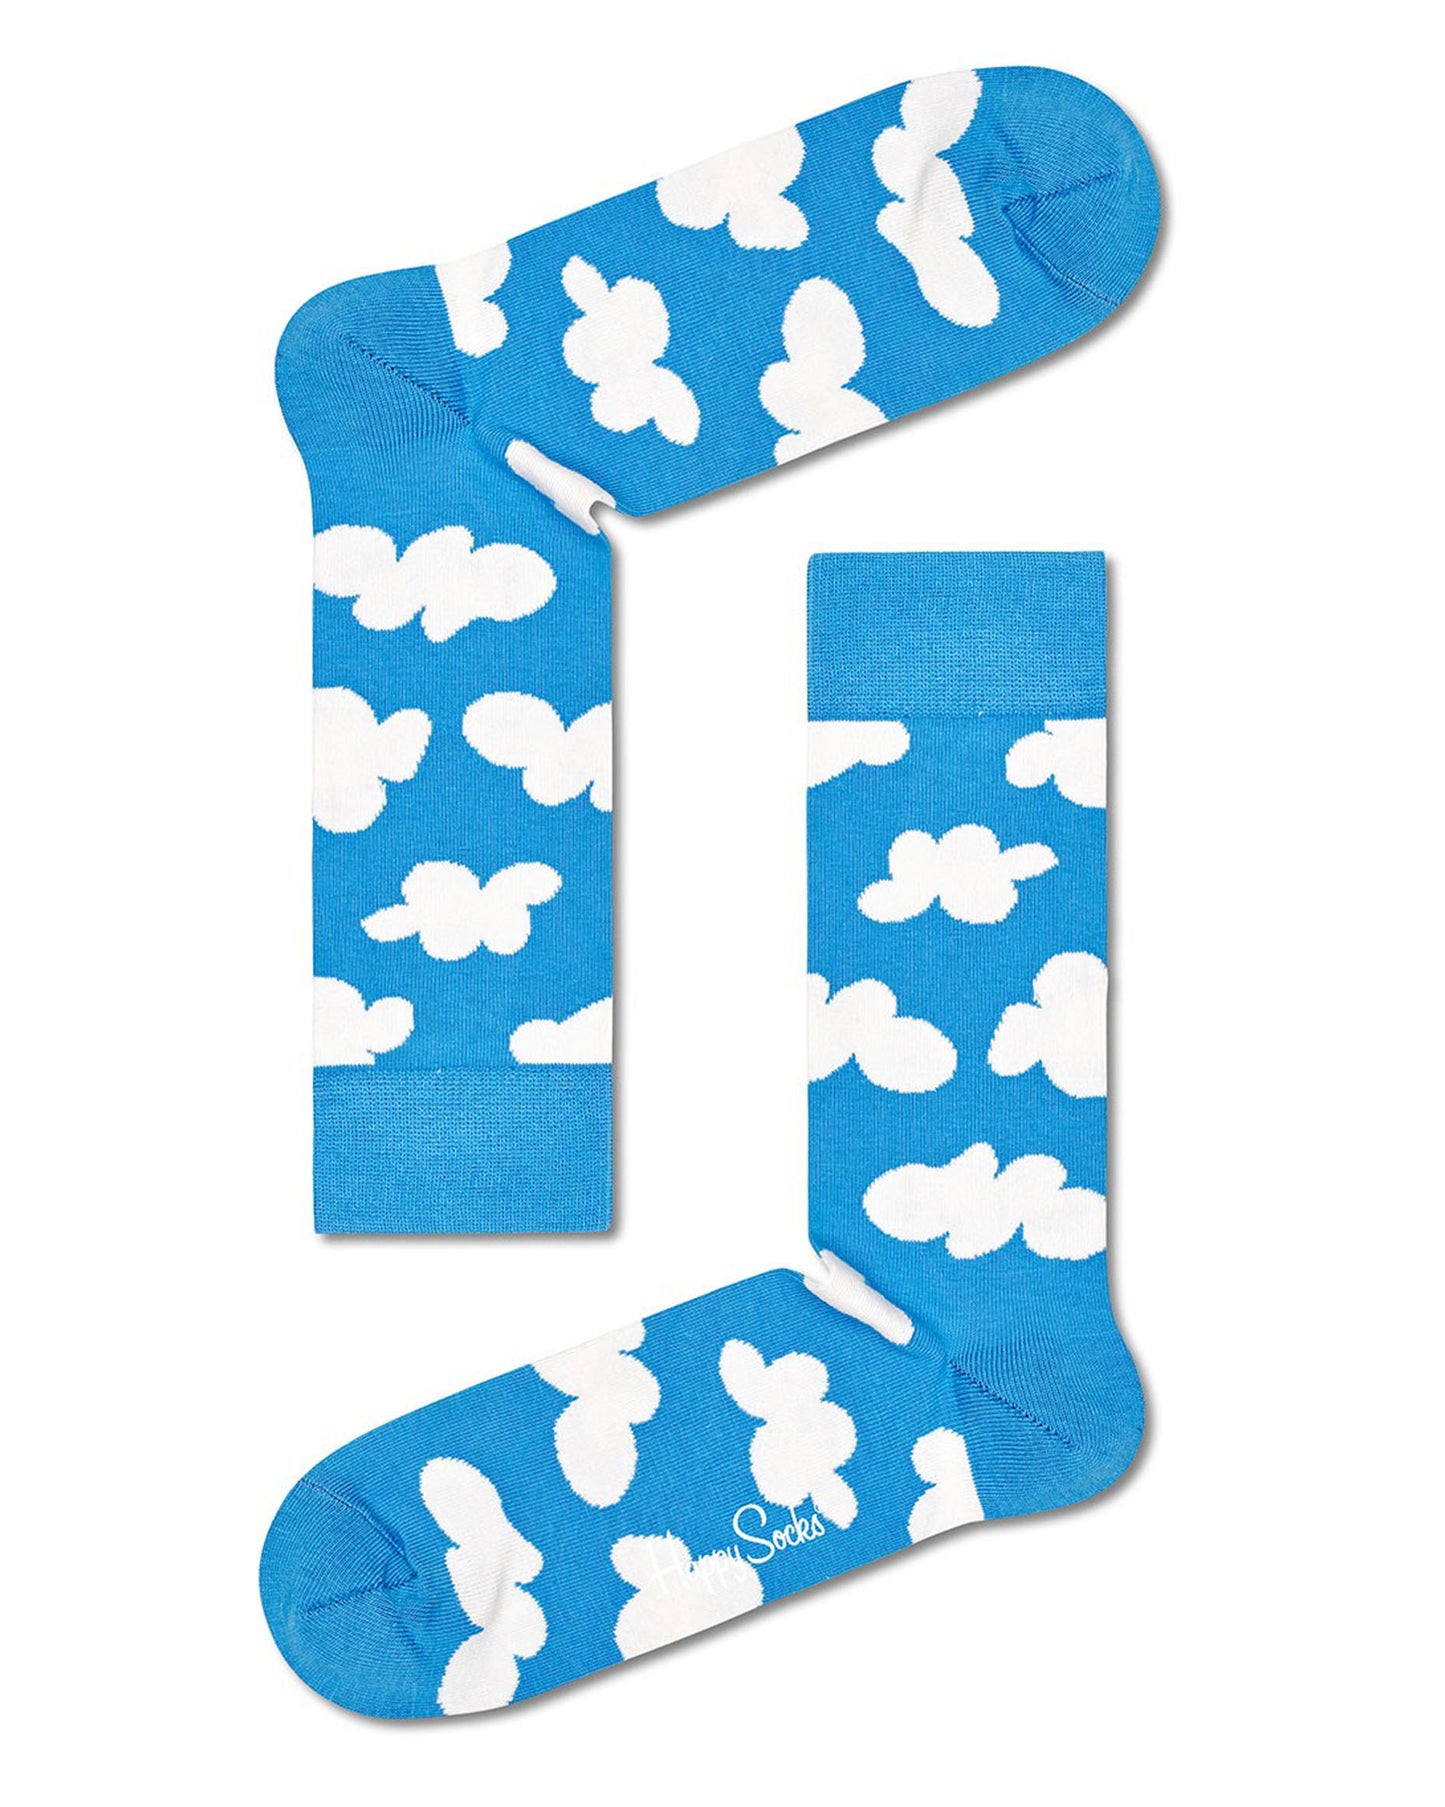 Happy Sock CLO01-6700 Cloudy Sock - Sky blue cotton crew length ankle socks with off white fluffy cumulus clouds pattern. Available in men and women's sizes.